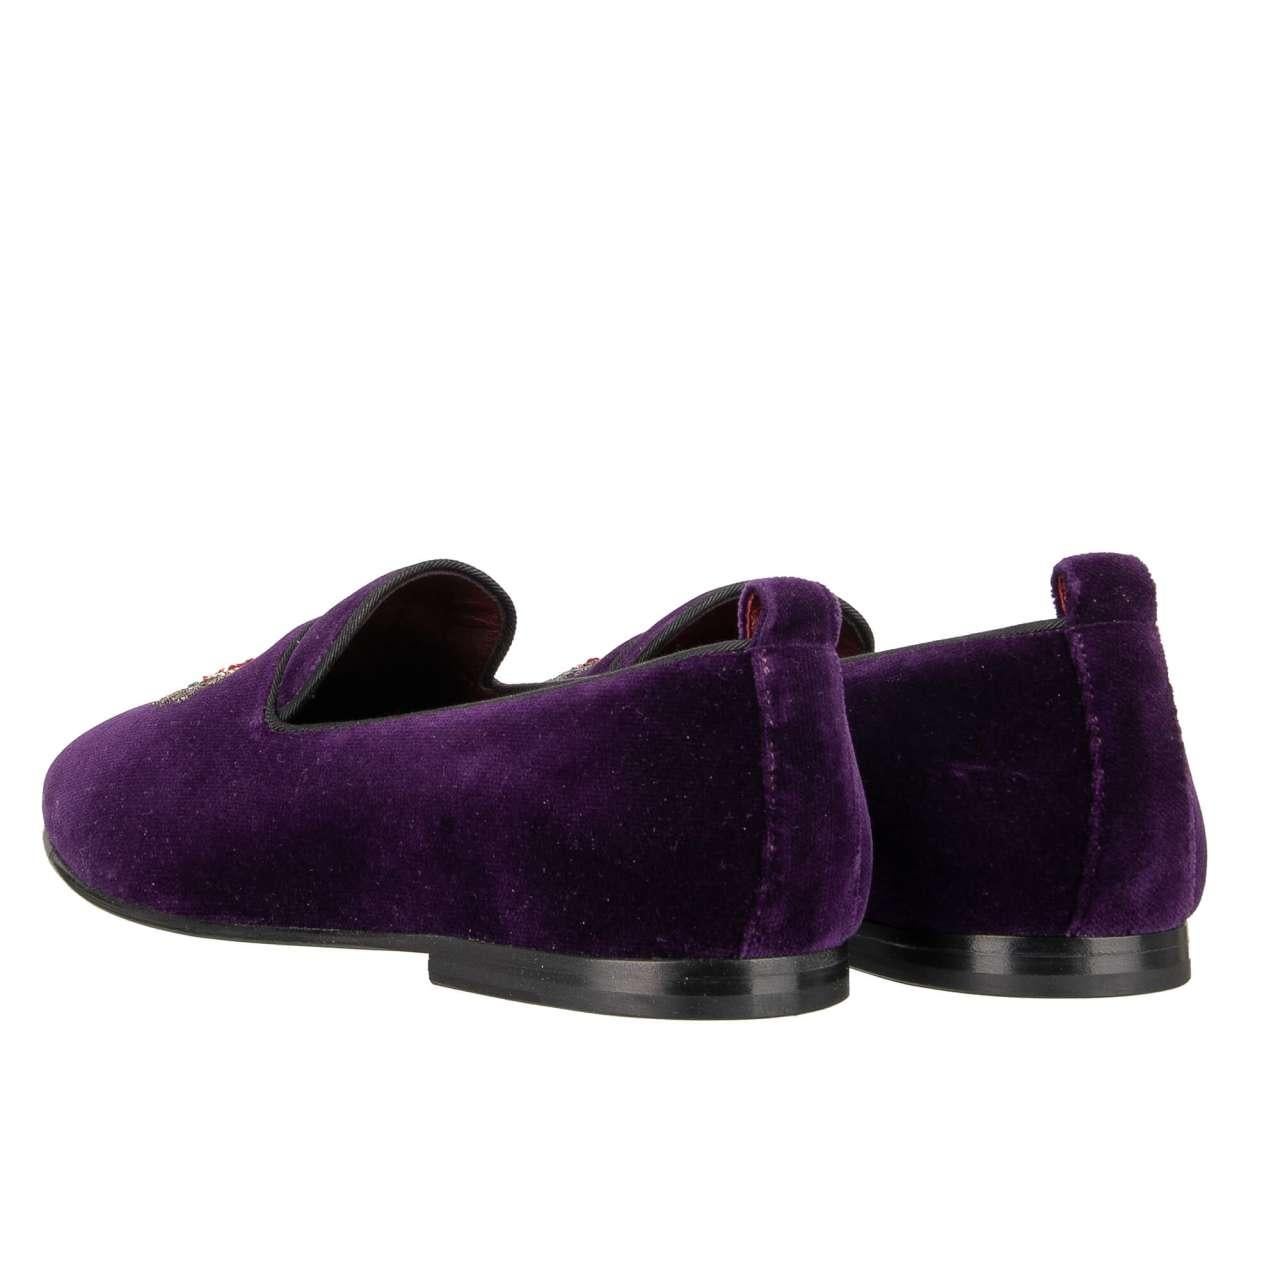 D&G - Heart Logo Embroidered Velvet Loafer YOUNG POPE Purple Red EUR 40 For Sale 2